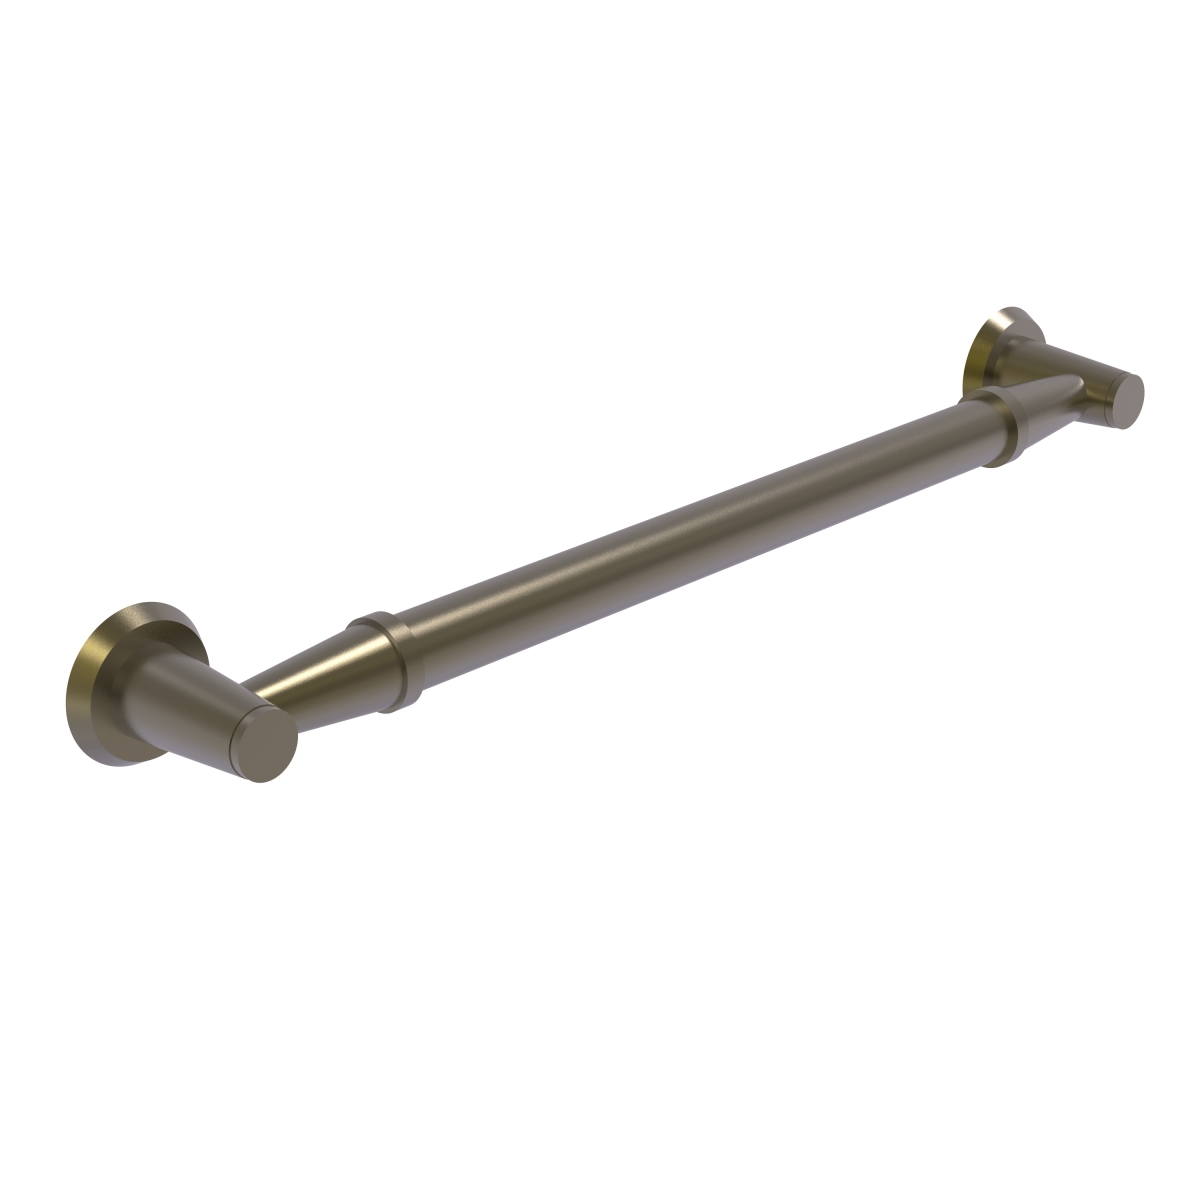 Picture of Allied Brass MD-GRS-24-ABR 24 in. Grab Bar Smooth, Antique Brass - 3.5 x 26 x 24 in.